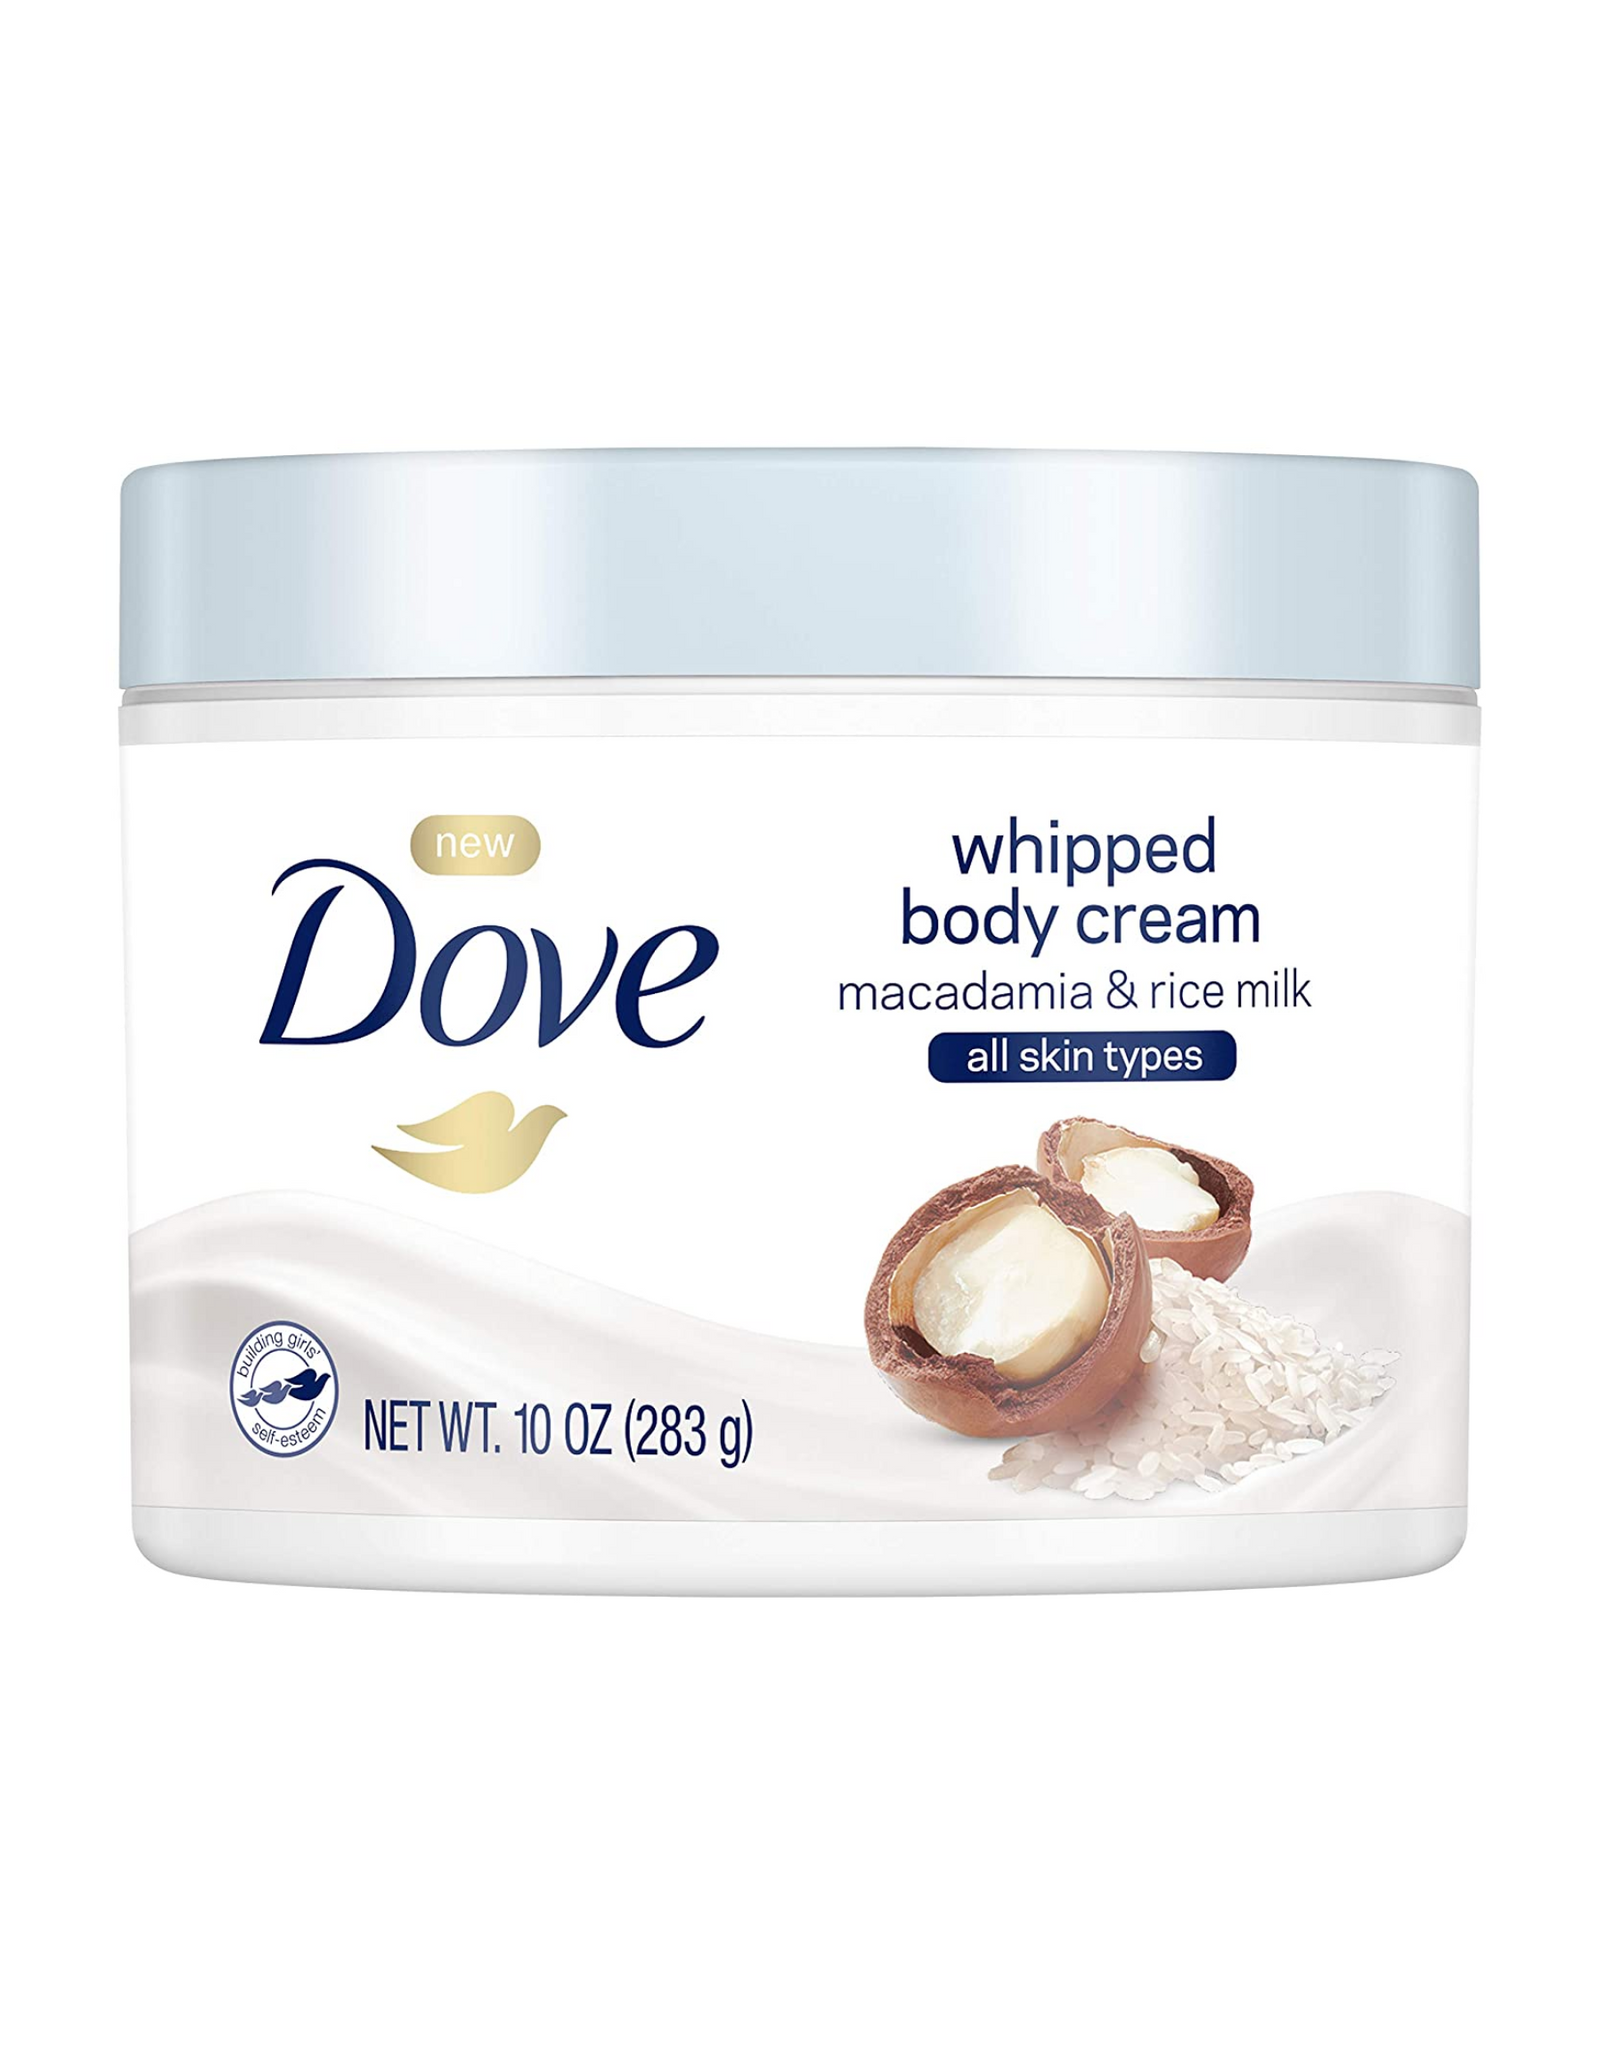 Dove Whipped Macadamia and Rice Milk Body Cream, for All Skin Types, 10 oz